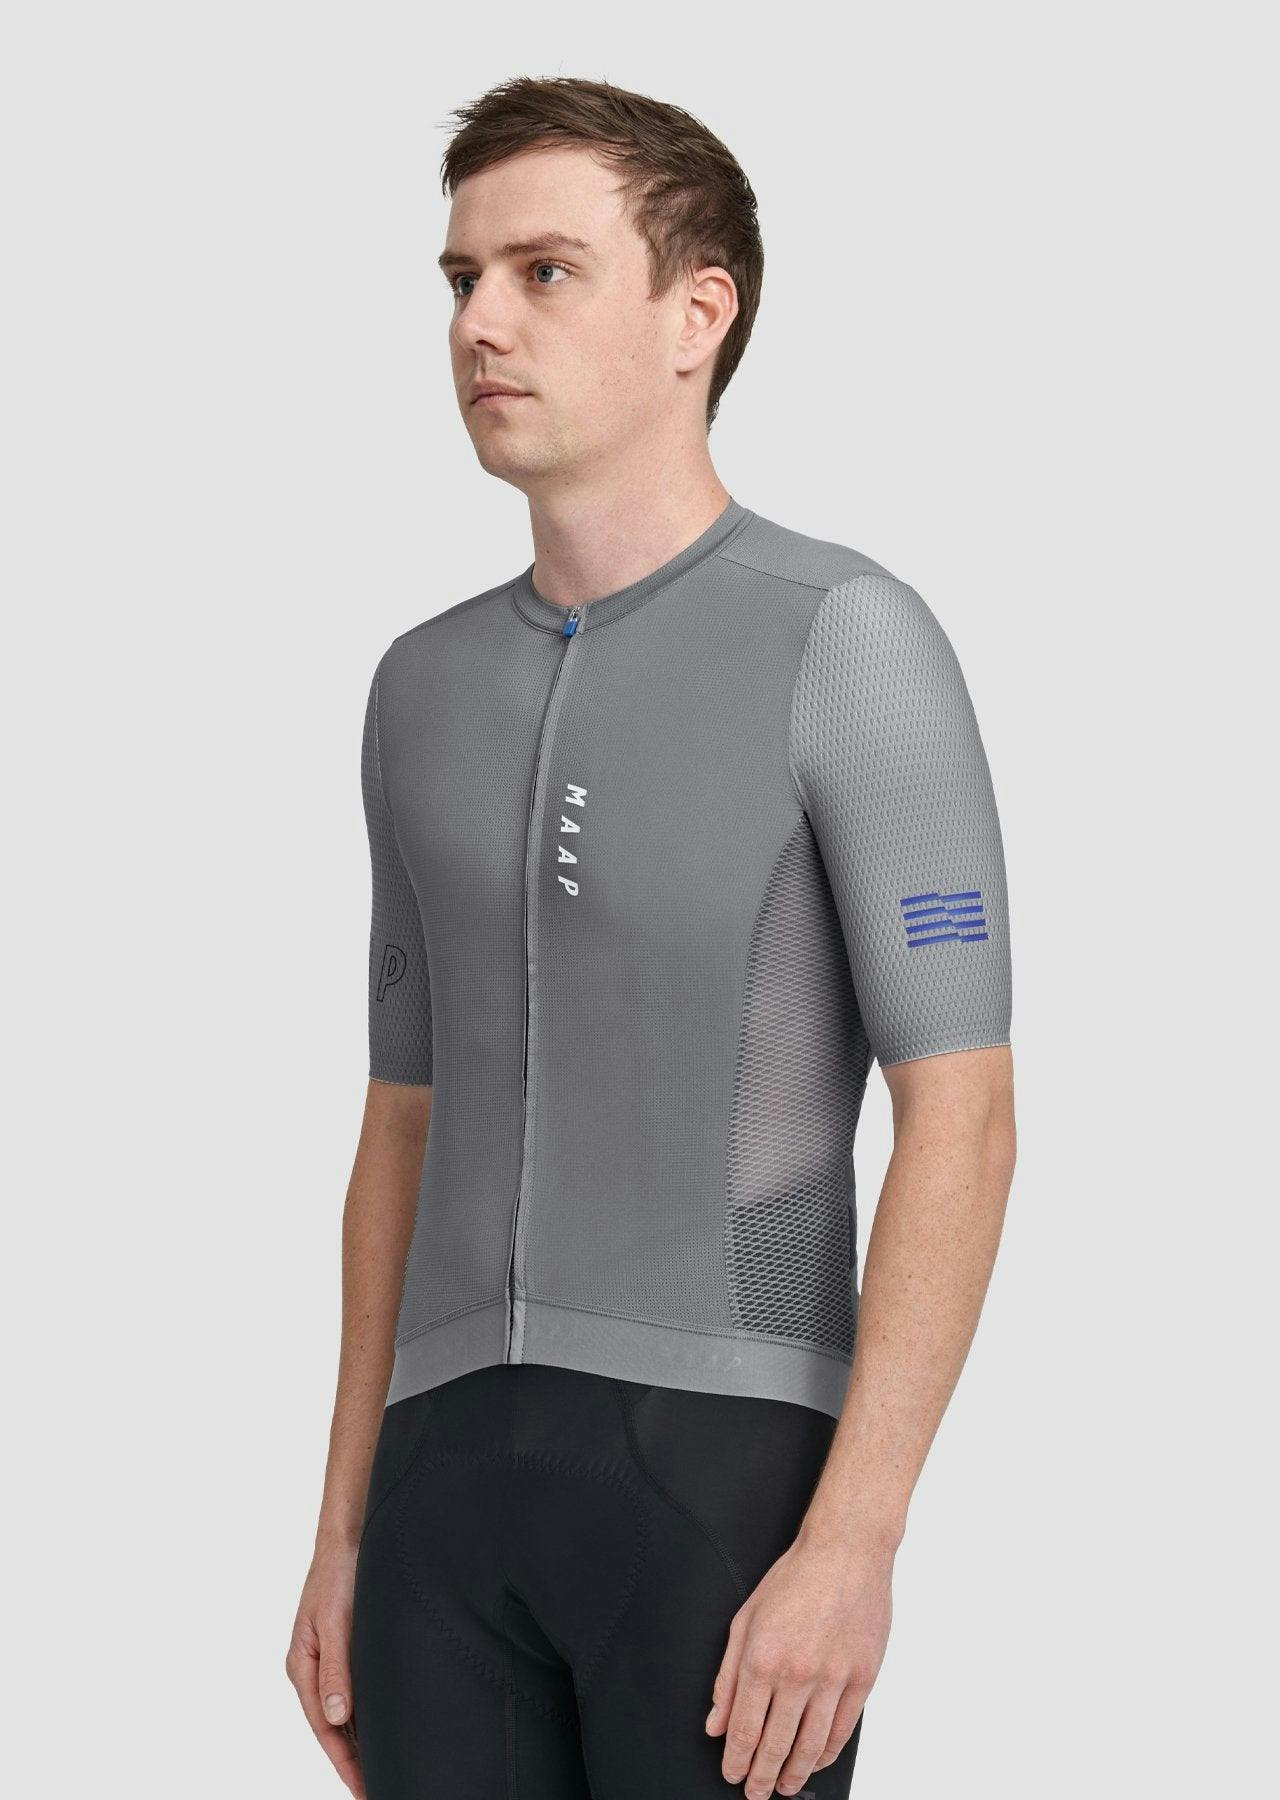 Stealth Race Fit Jersey